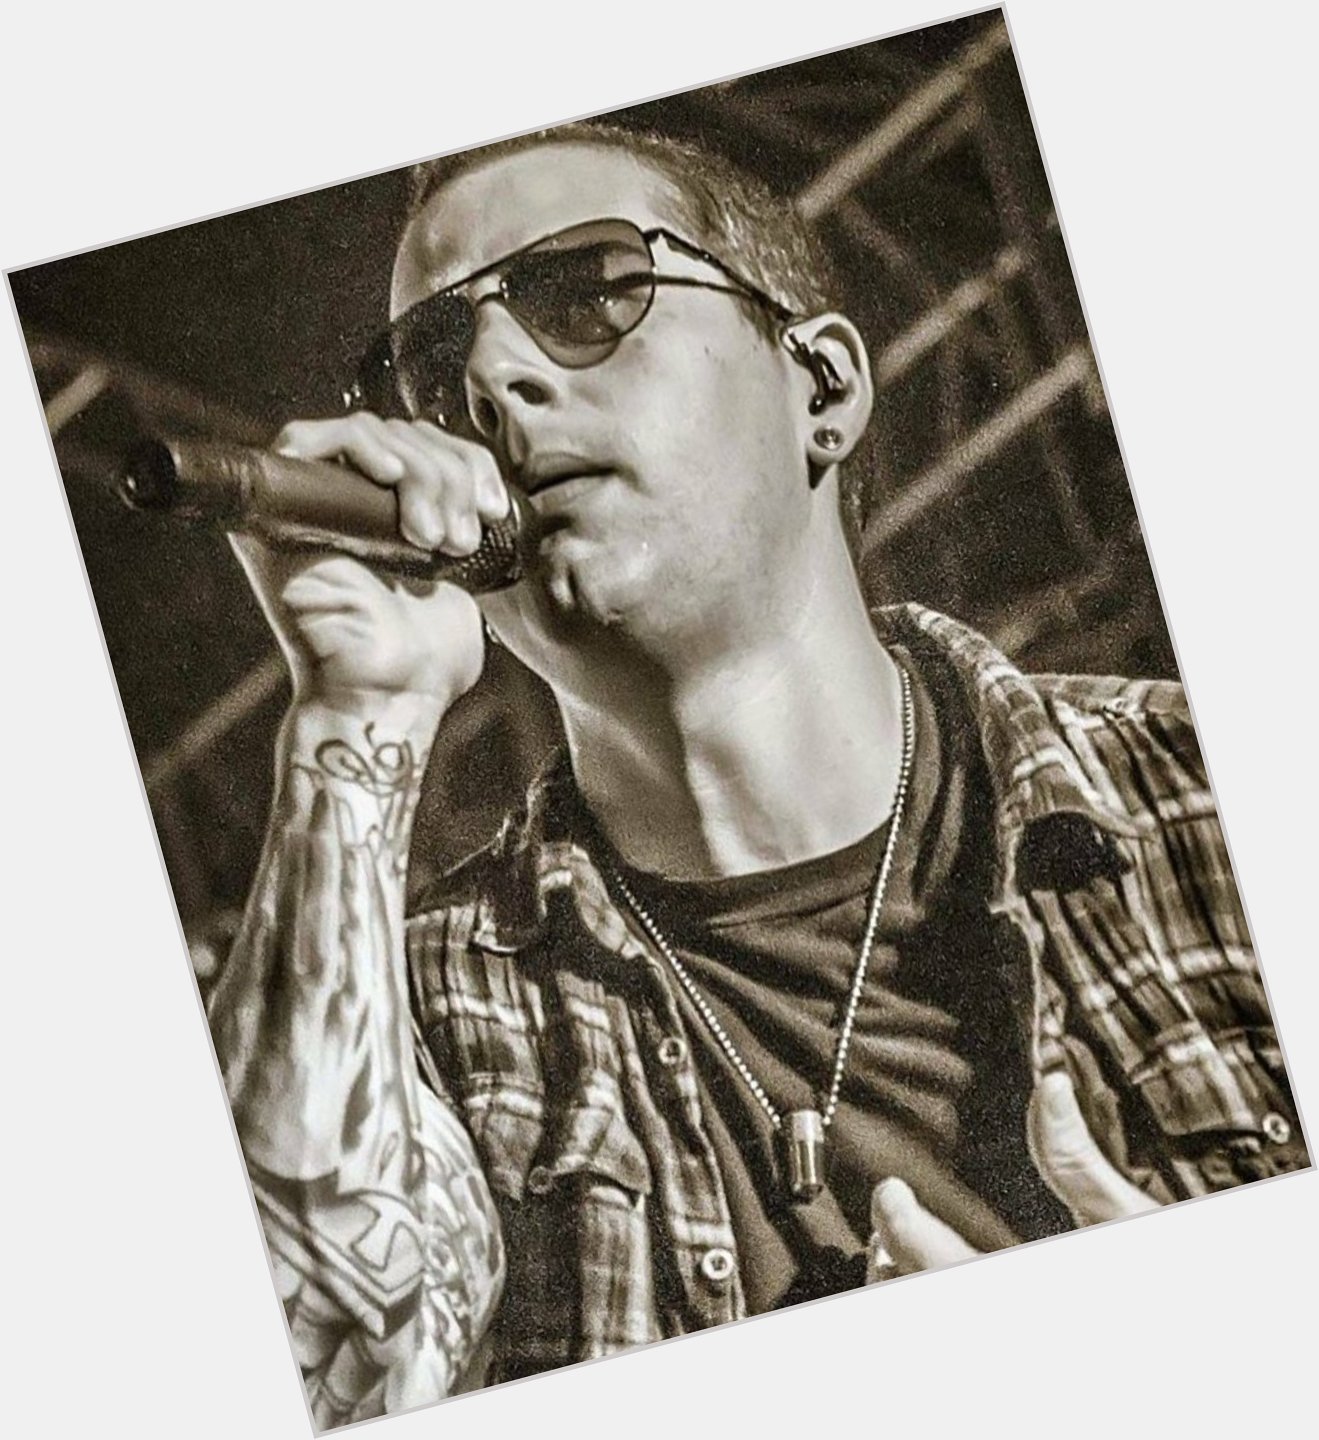 Happy 36th Birthday to the Mighty M. Shadows!! 